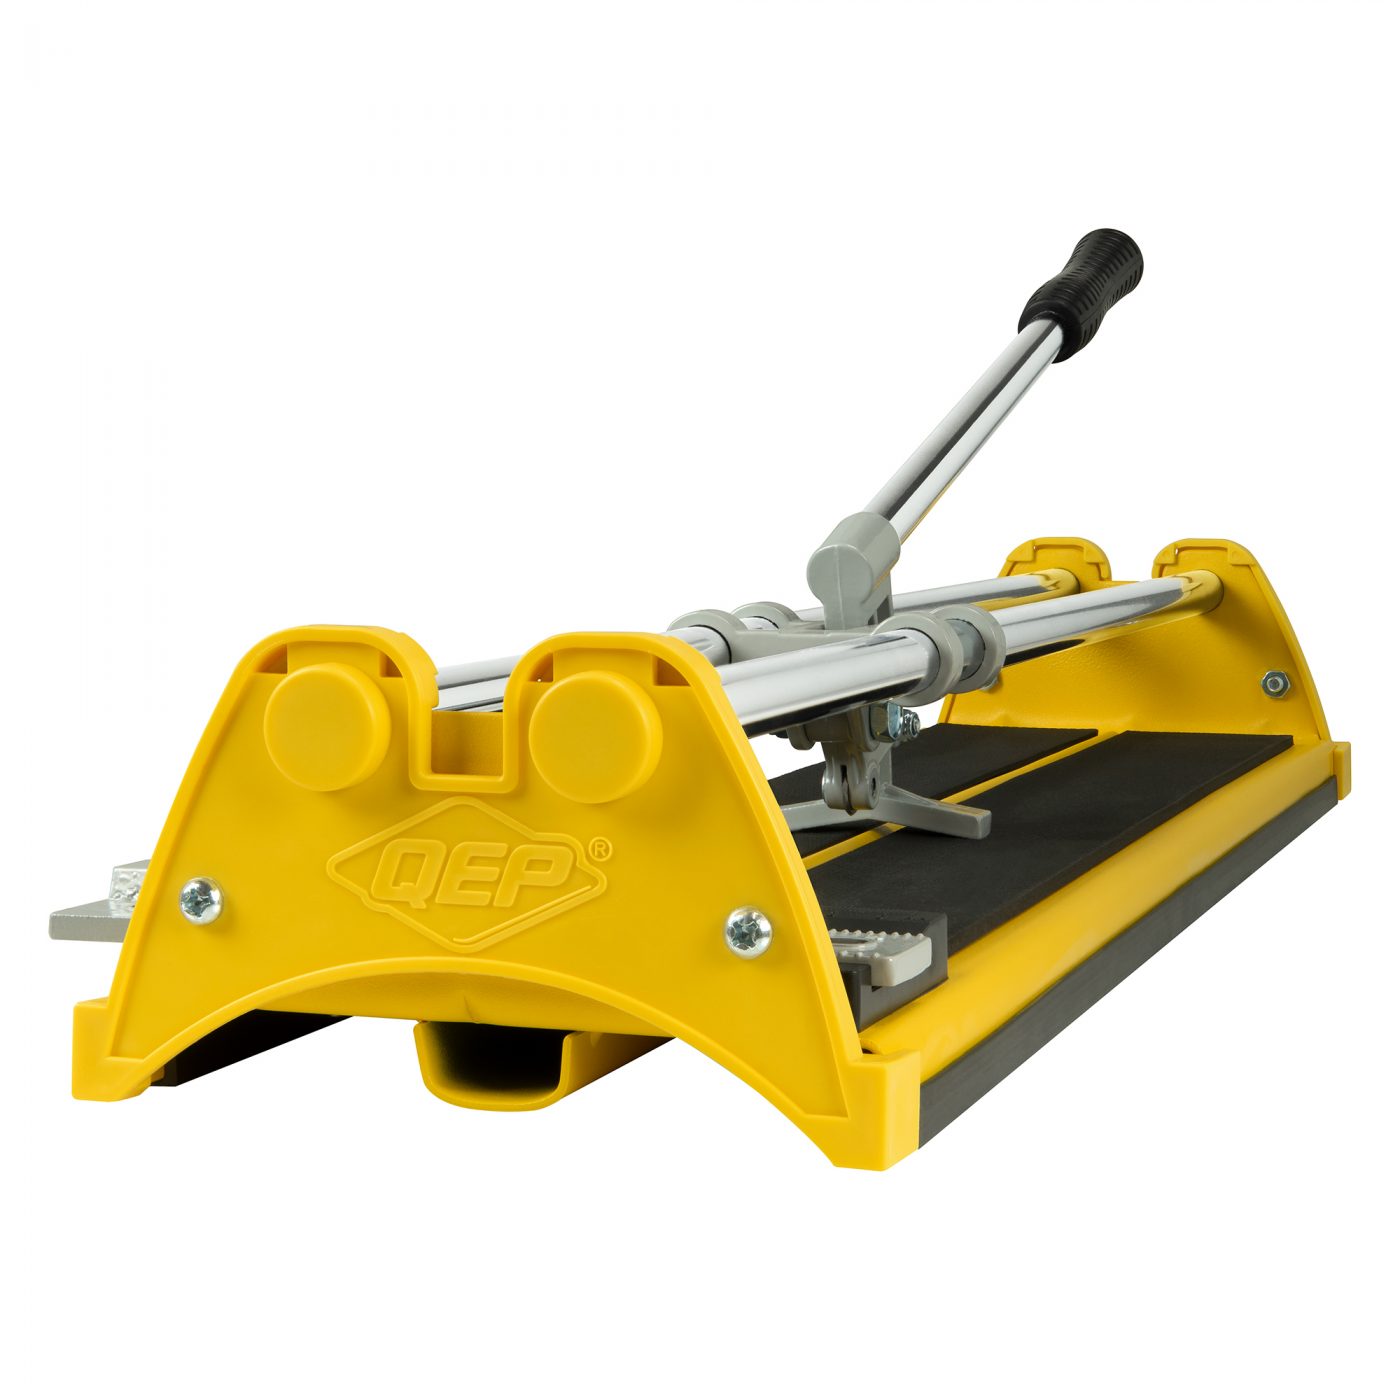 20" Professional Tile Cutter